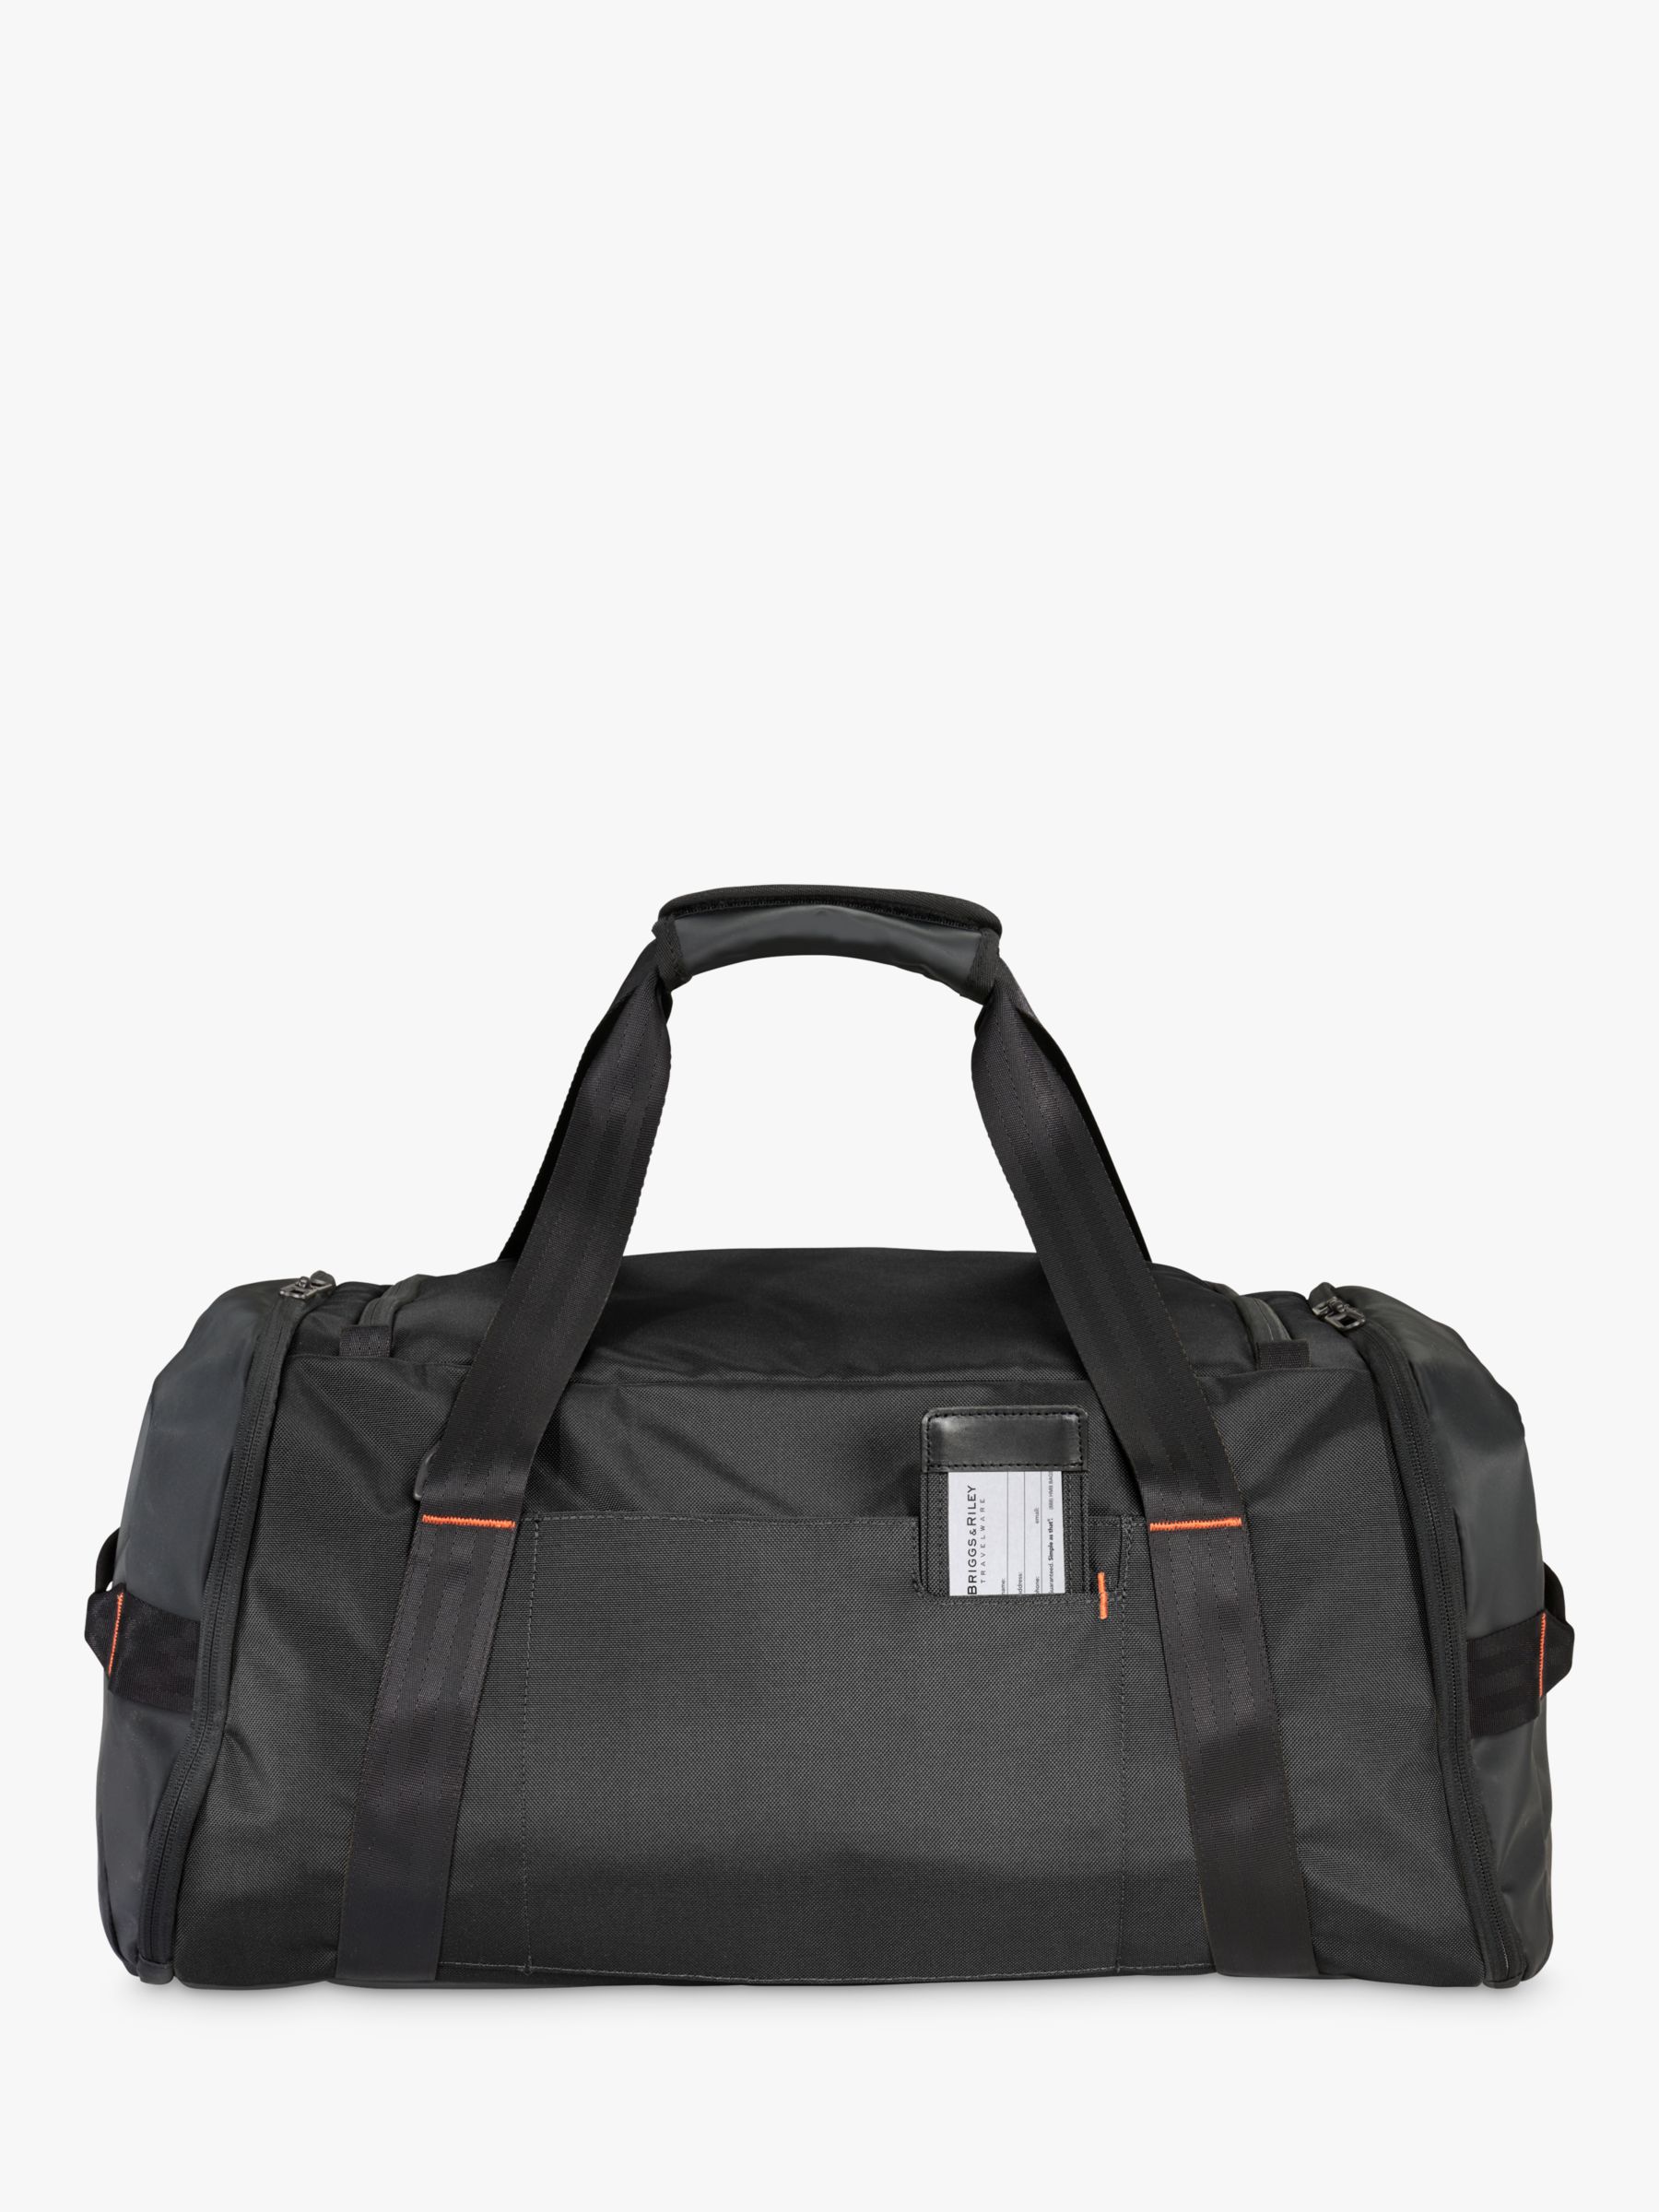 Buy Briggs & Riley ZDX Large Travel Duffle Holdall Online at johnlewis.com